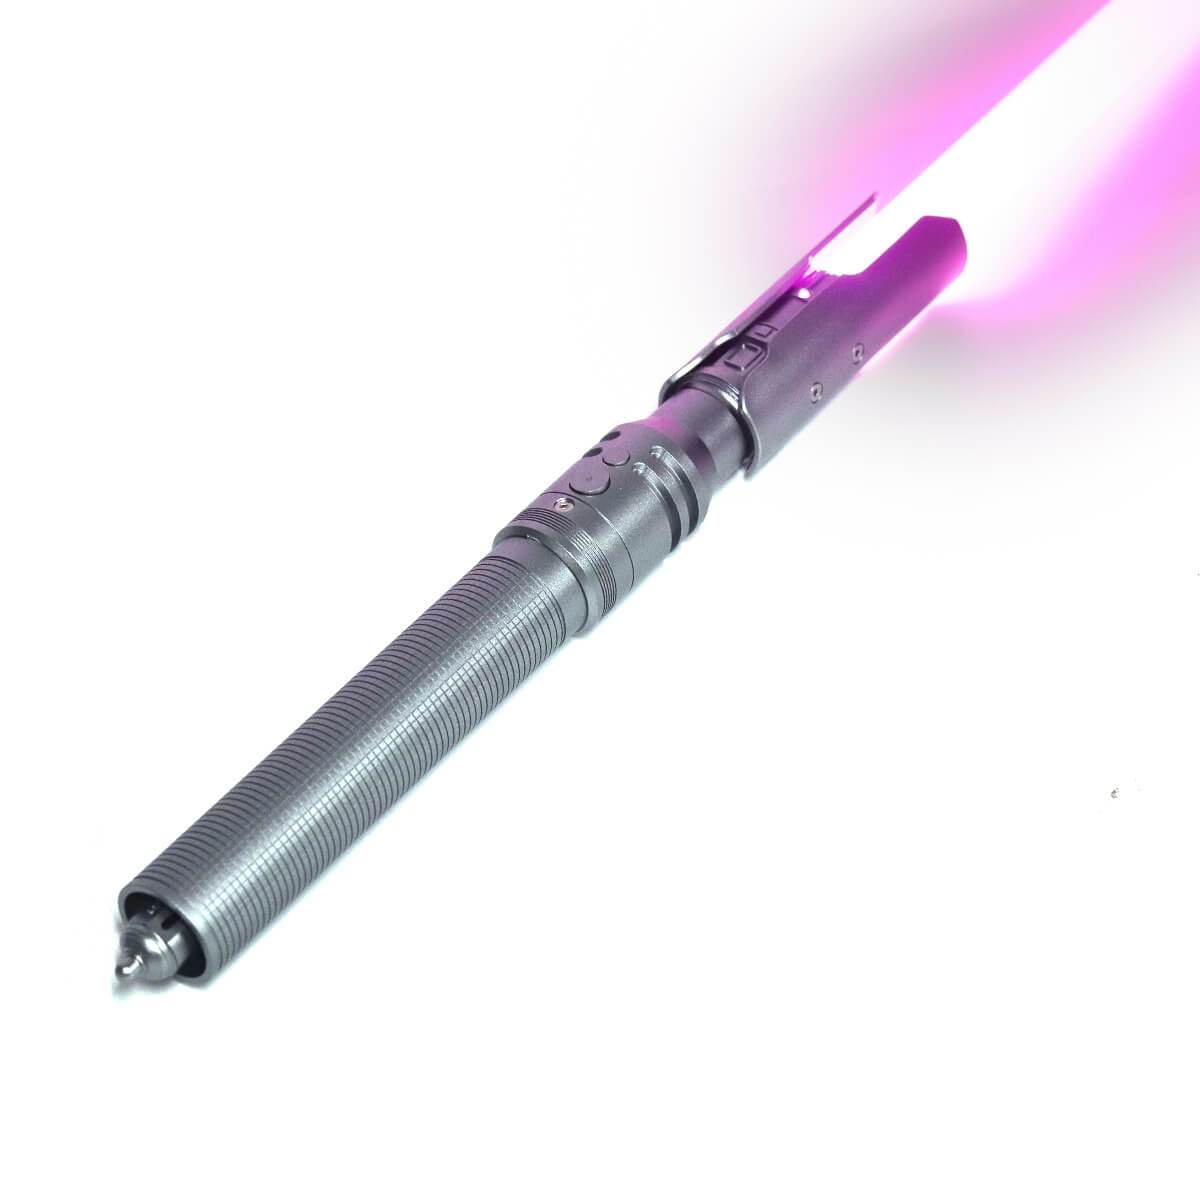 Monolopho Lightsaber Silver / RGB isabers